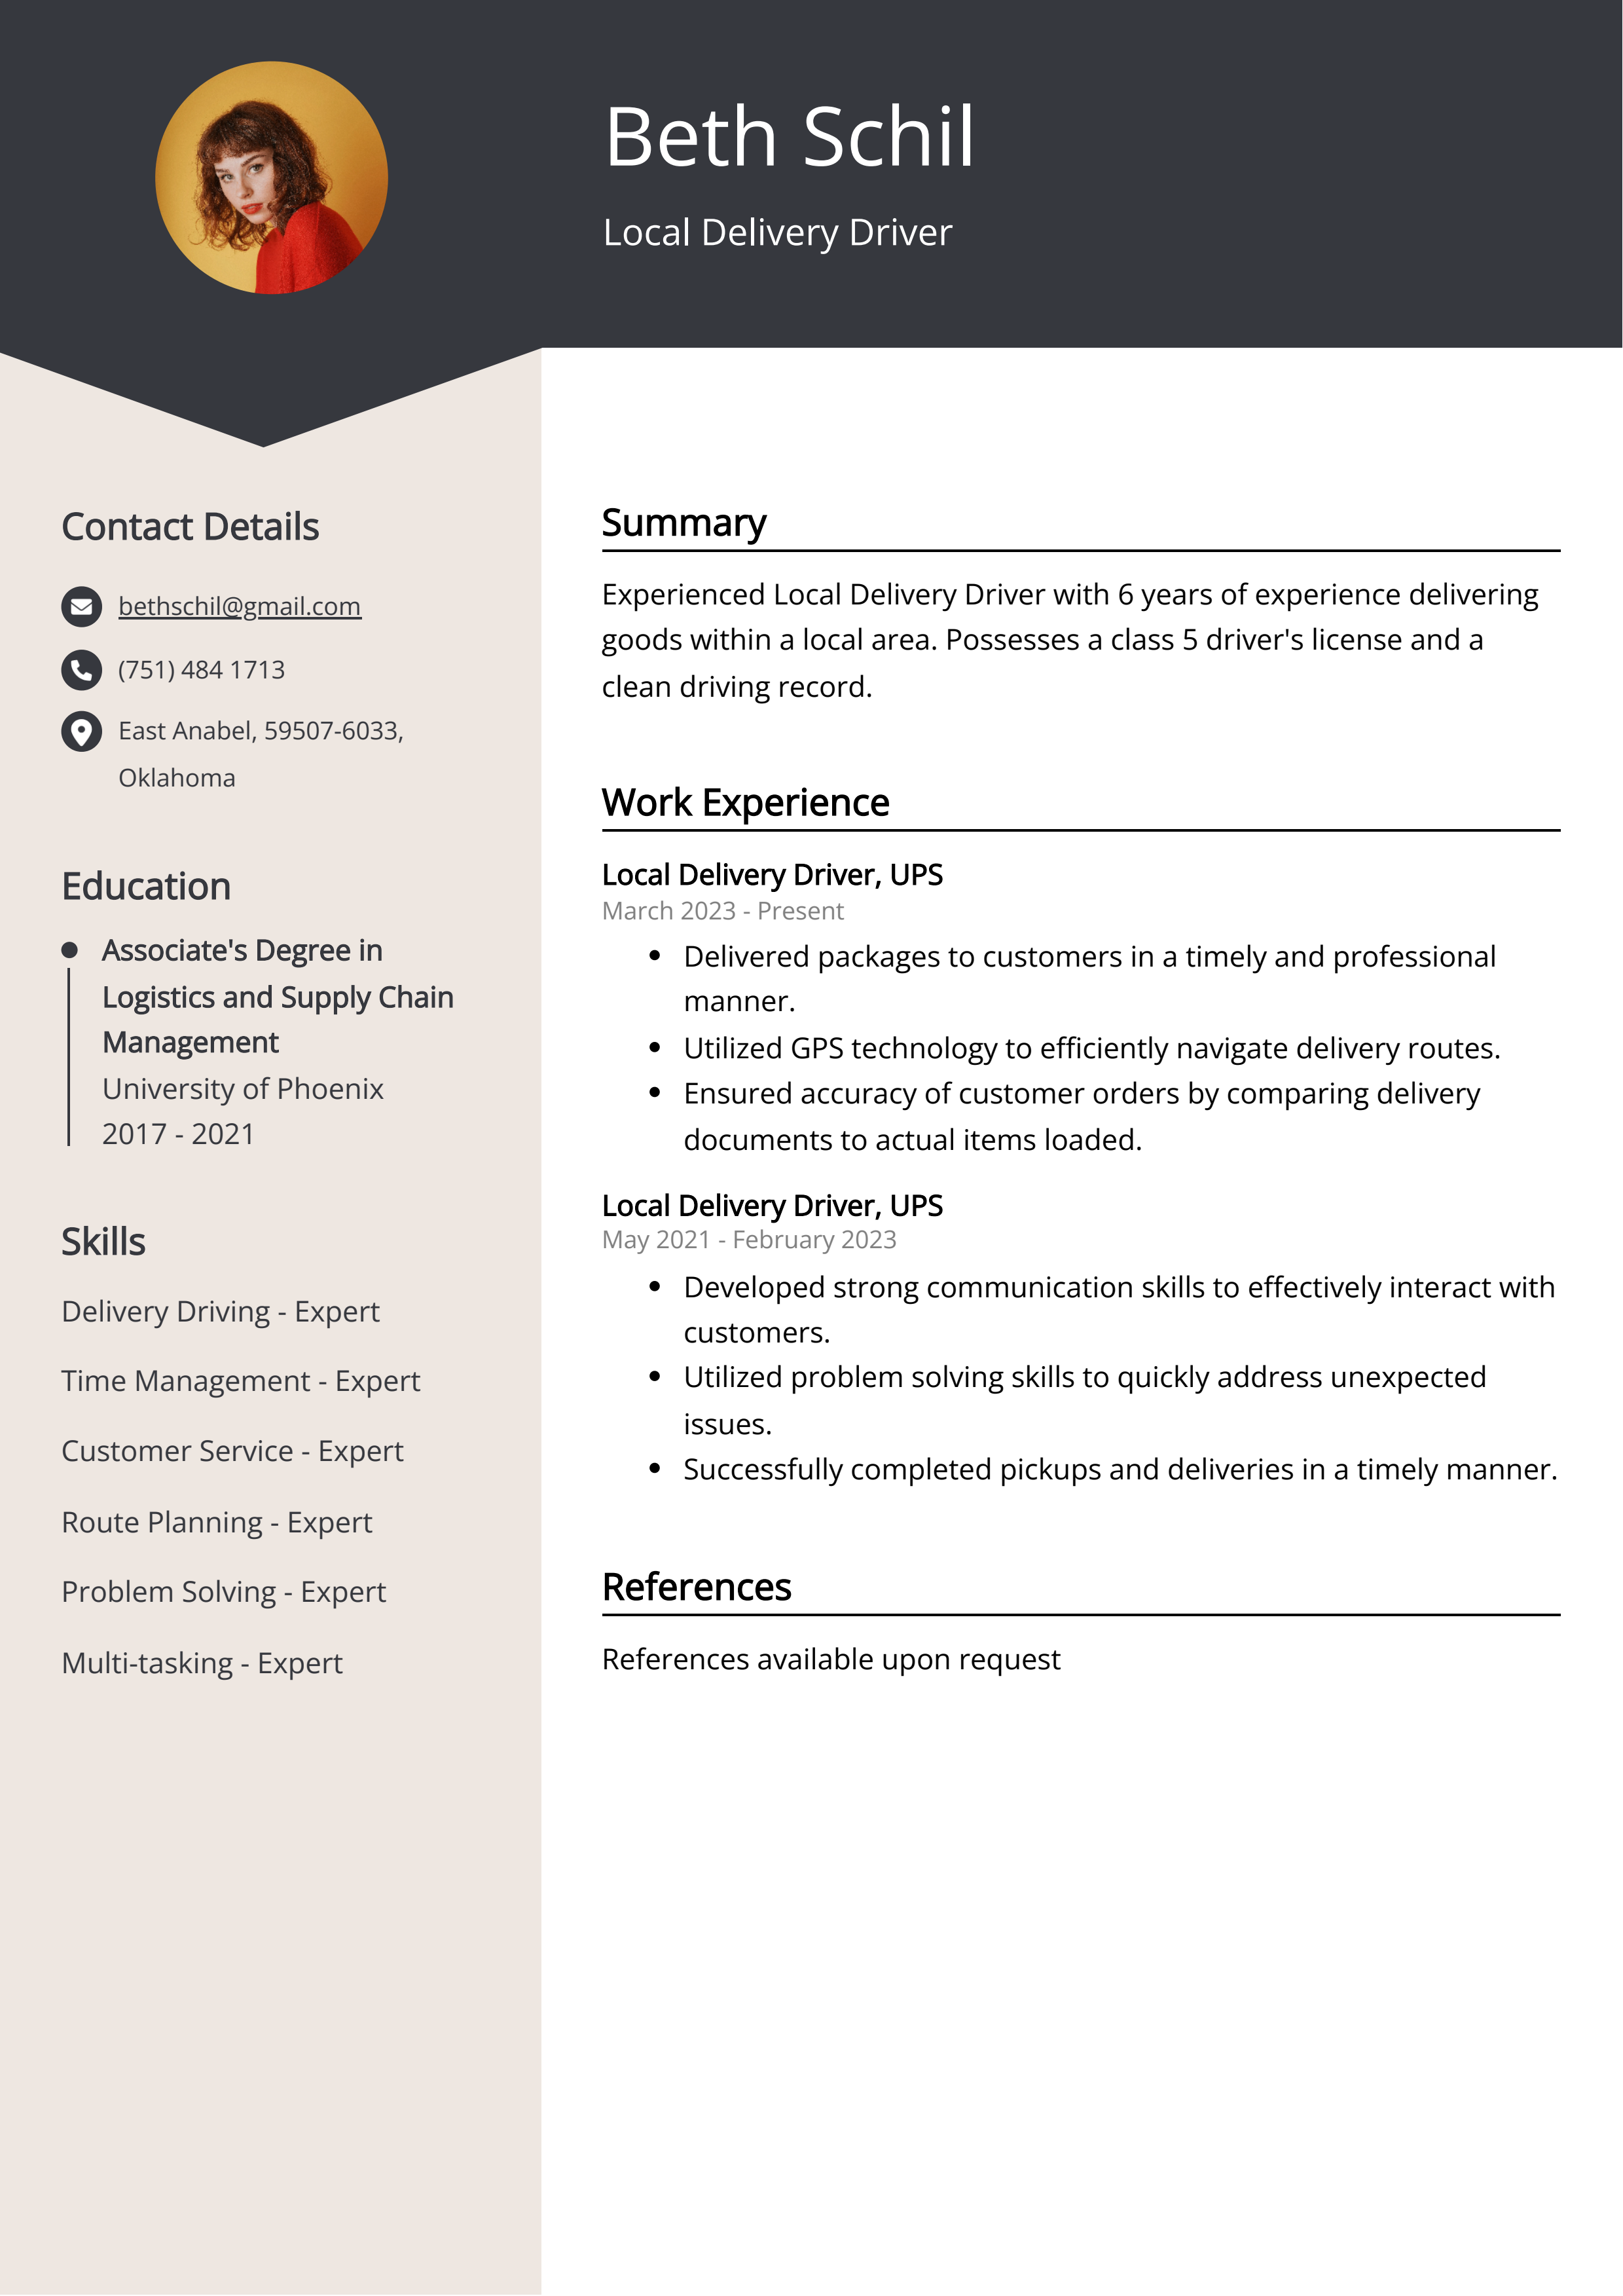 Local Delivery Driver CV Example